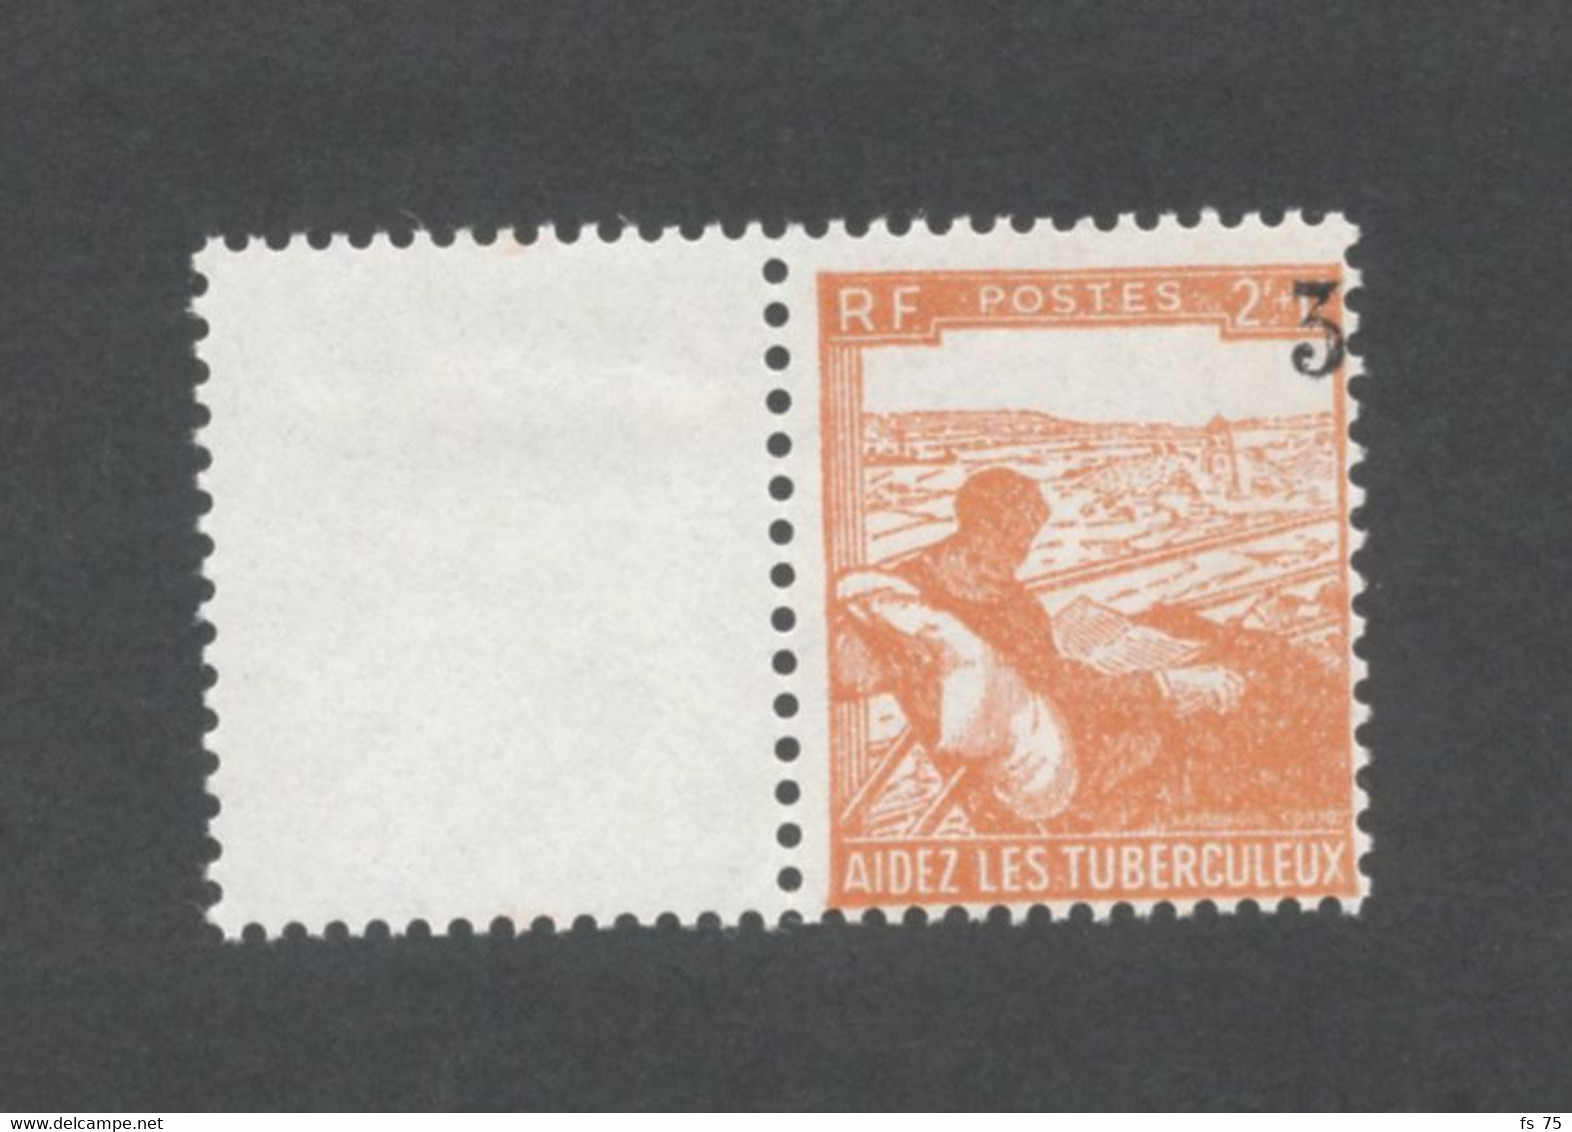 FRANCE - N°750  2F AIDEZ LES TUBERCULEUX - SURCHARGE DEPLACEE 3 SANS F - NEUF SANS CHARNIERE - Unused Stamps